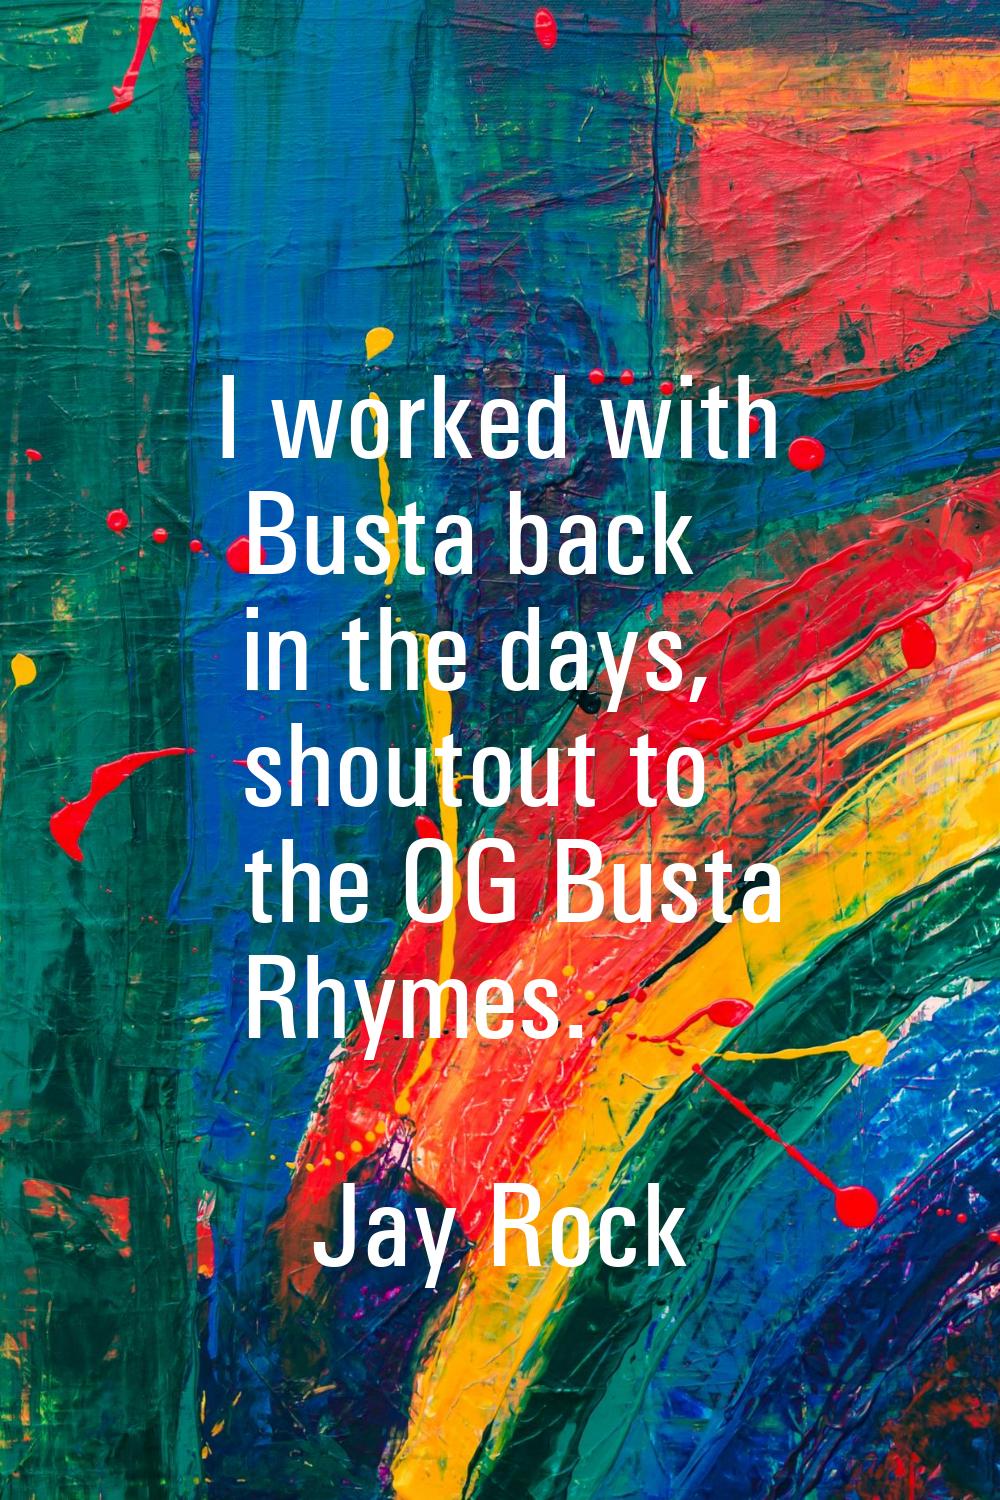 I worked with Busta back in the days, shoutout to the OG Busta Rhymes.